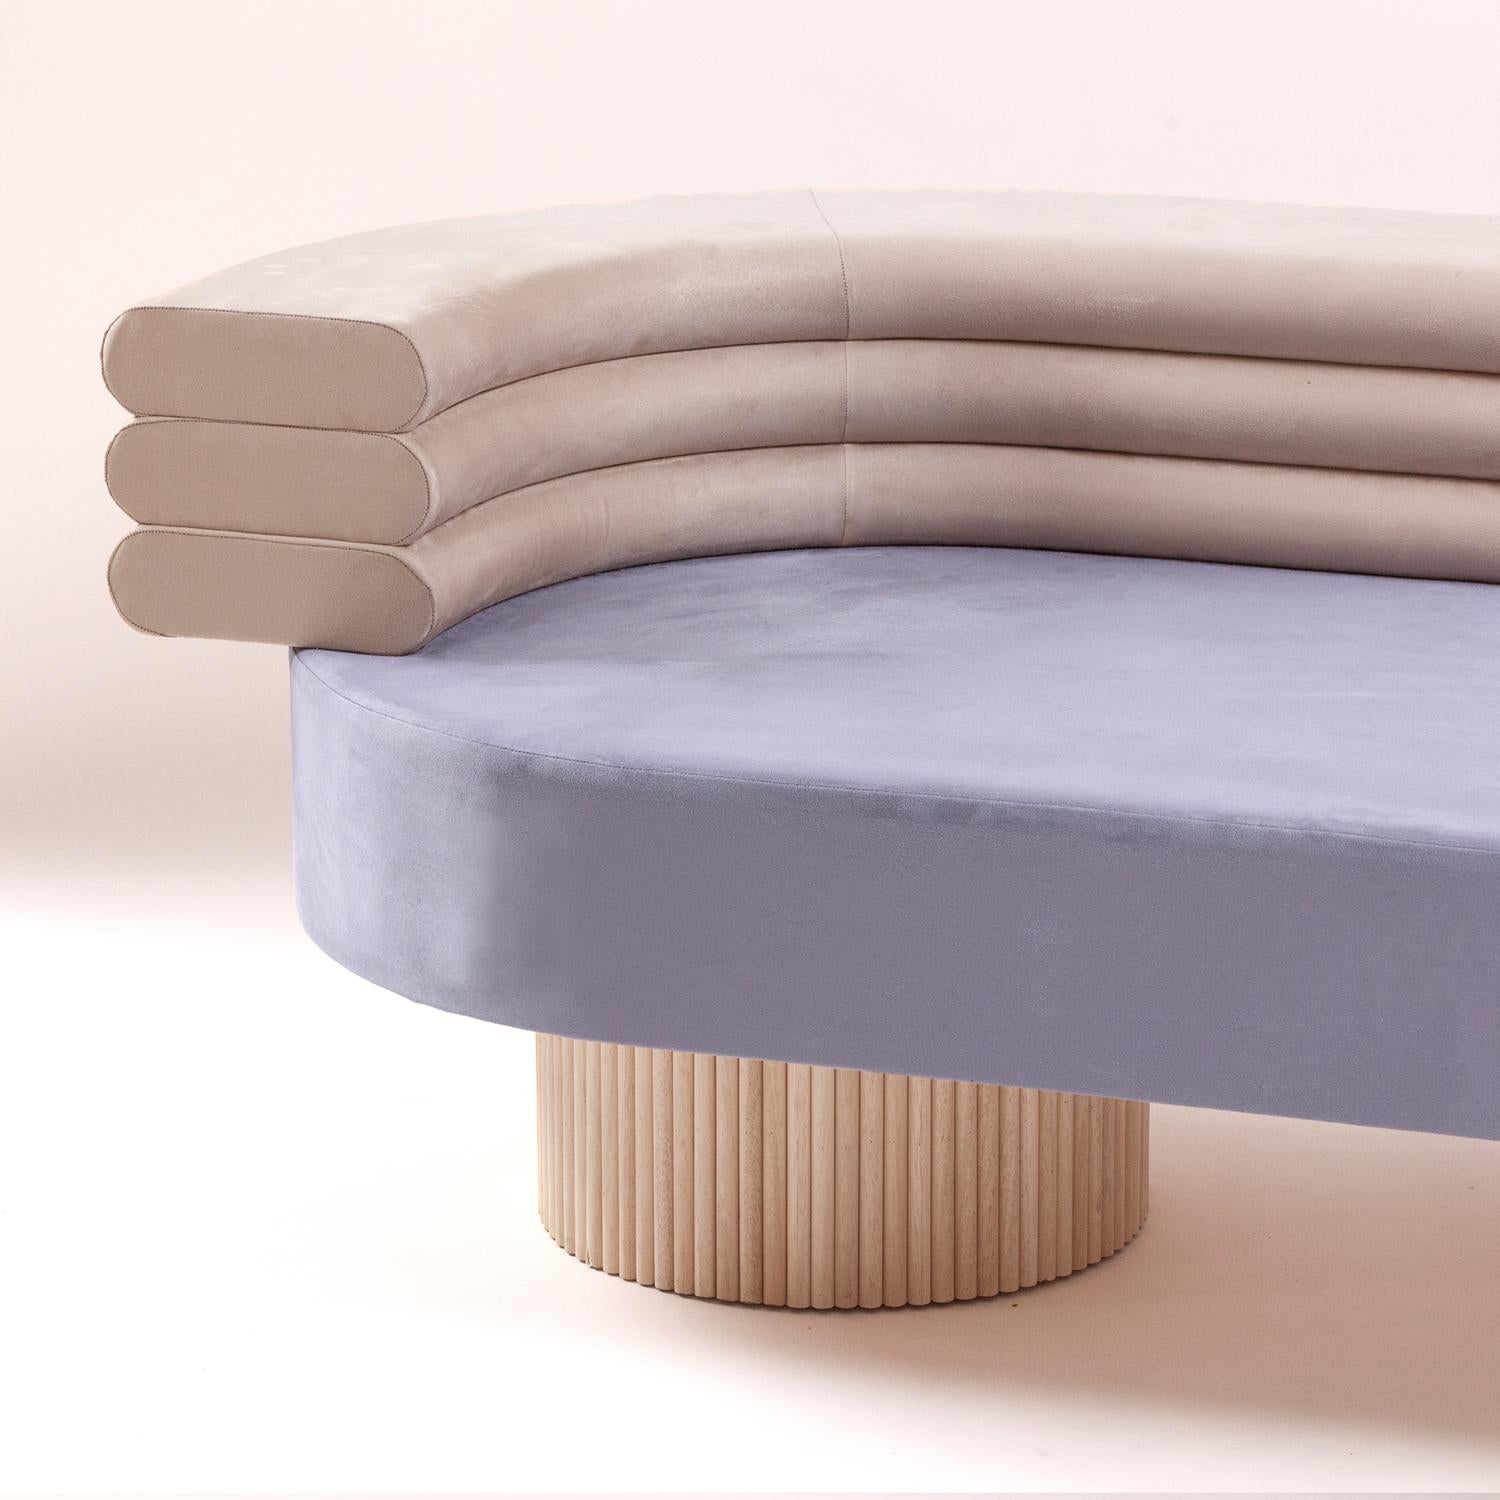 Part of the O collection designed by Jacobsroom Studio, Rome, this limited edition two-tone chaise longue draws inspiration from the sweeping architecture of arches and from the sensations kindled by the natural spectacle of hot springs